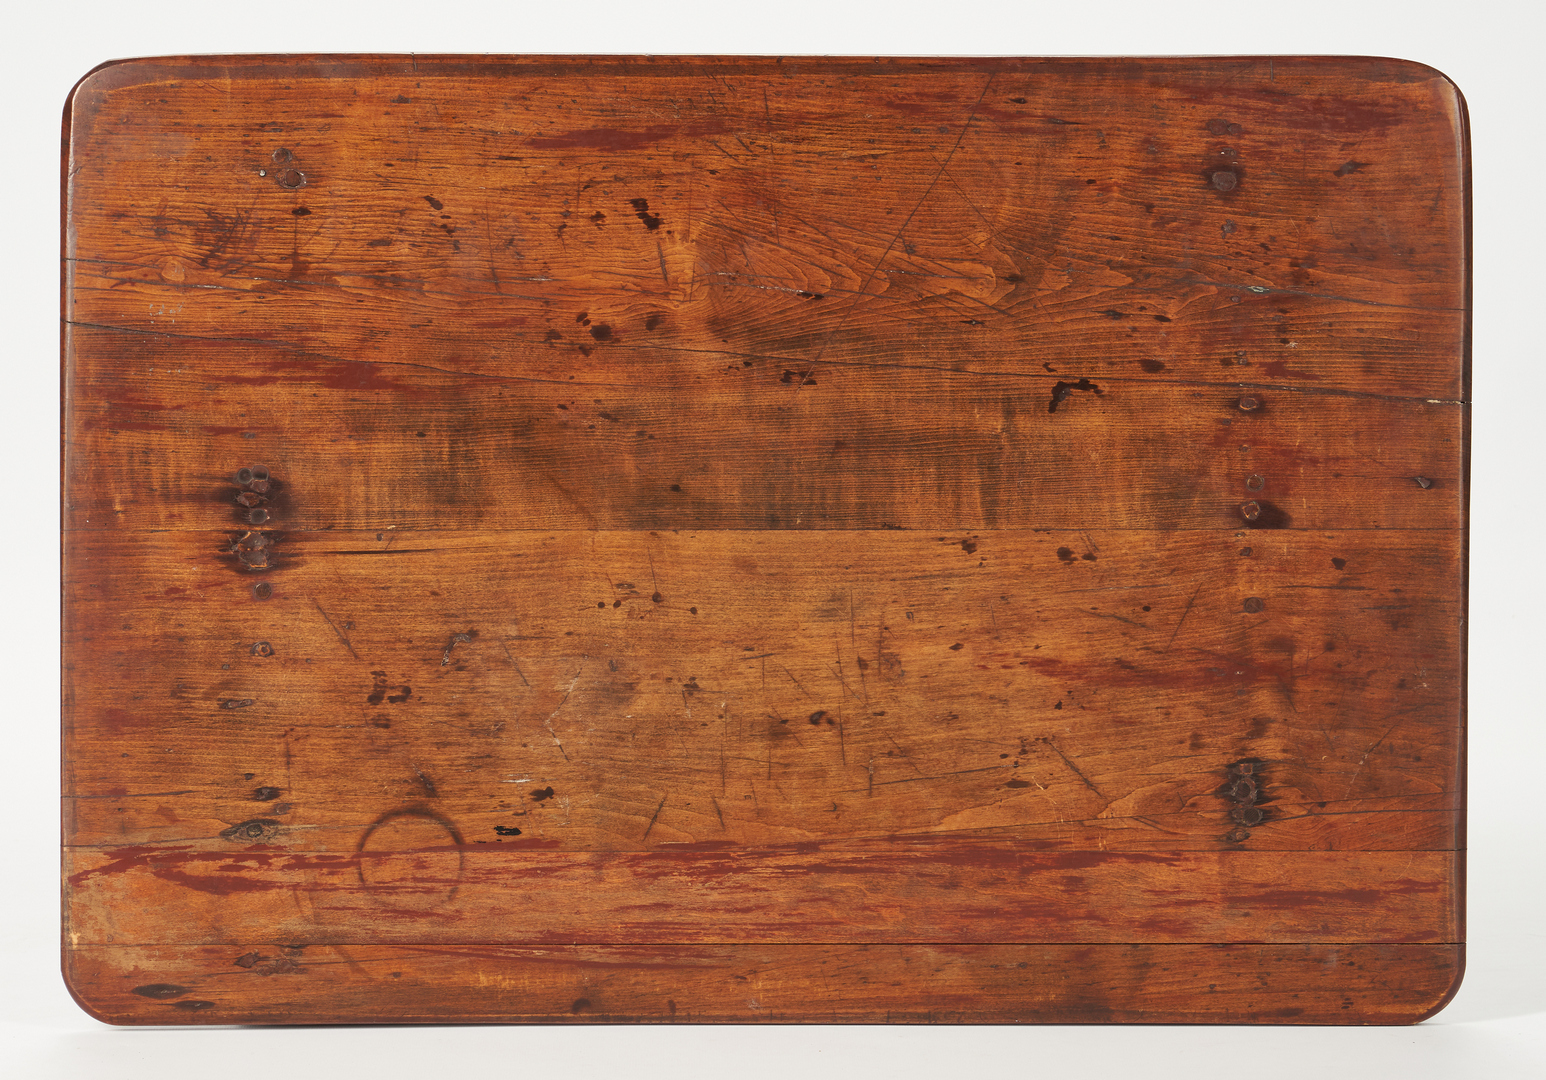 Lot 234: American Red Wash Tavern Table